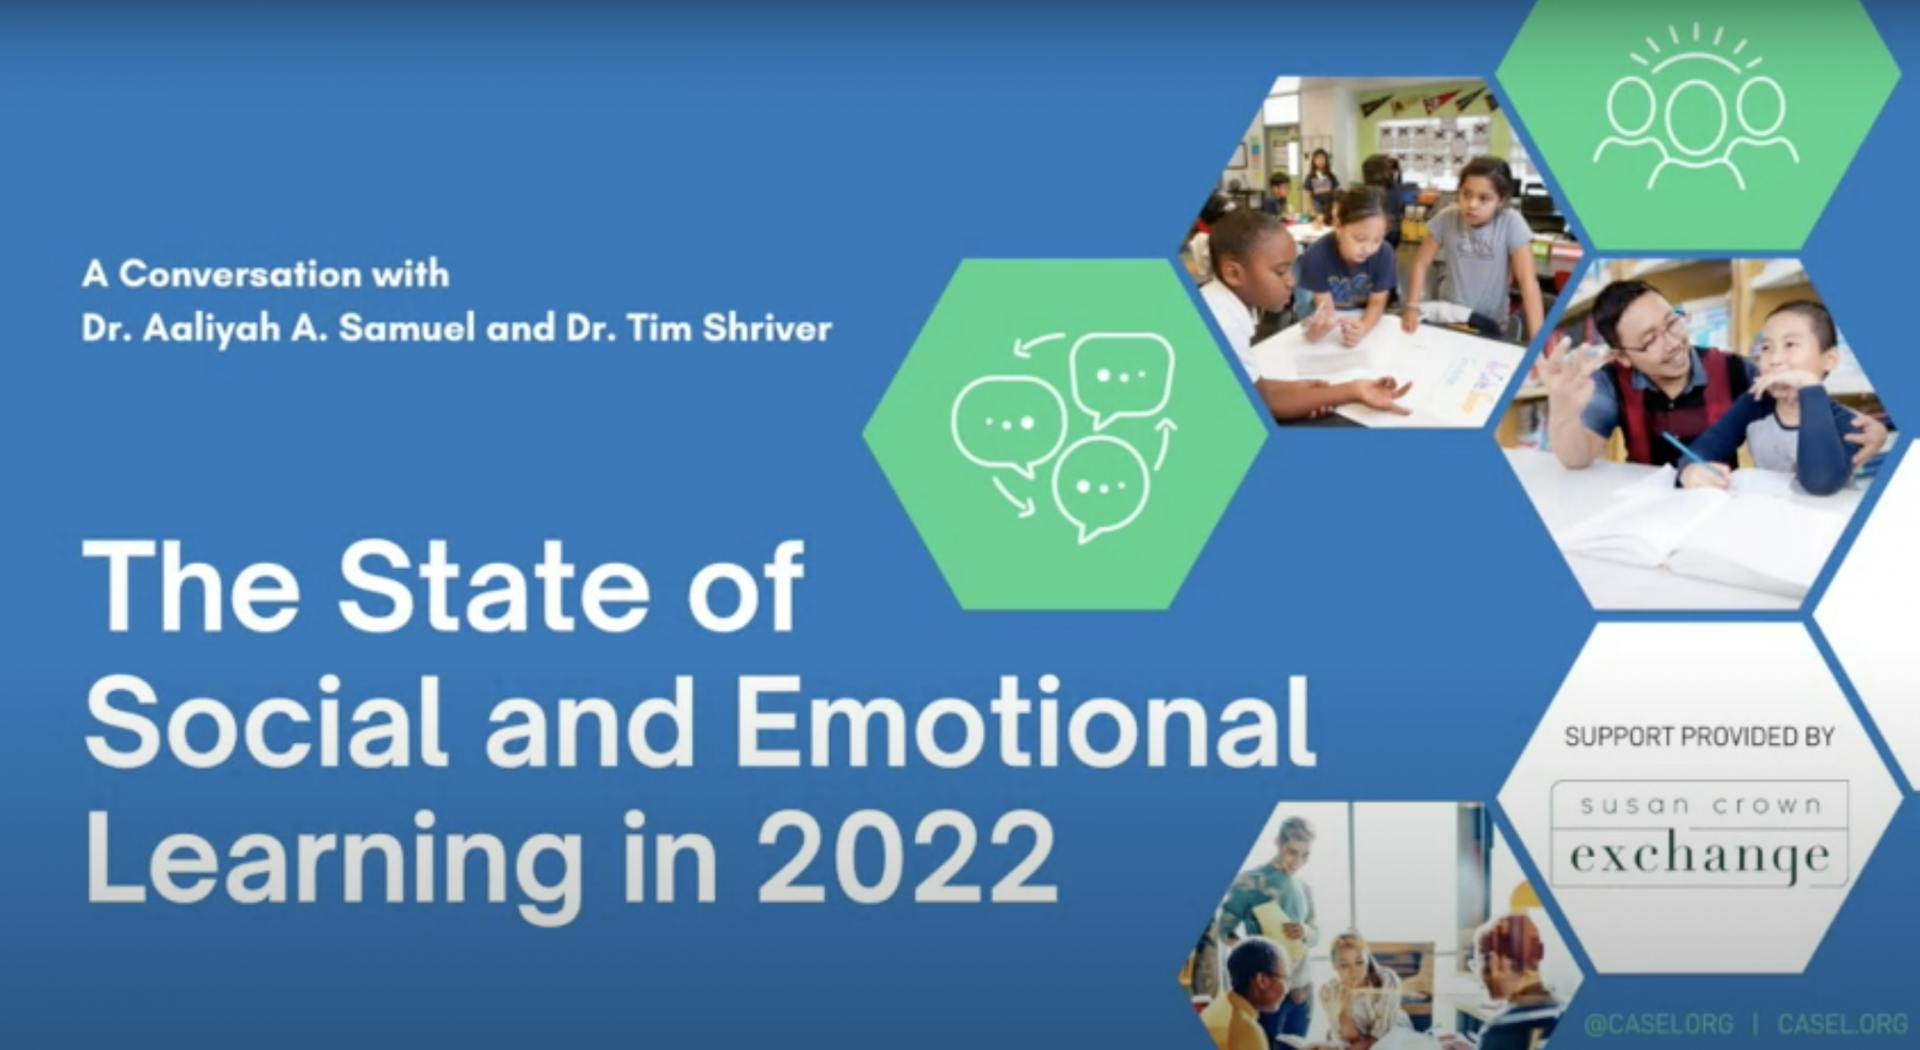 The State of Social and Emotional Learning in 2022